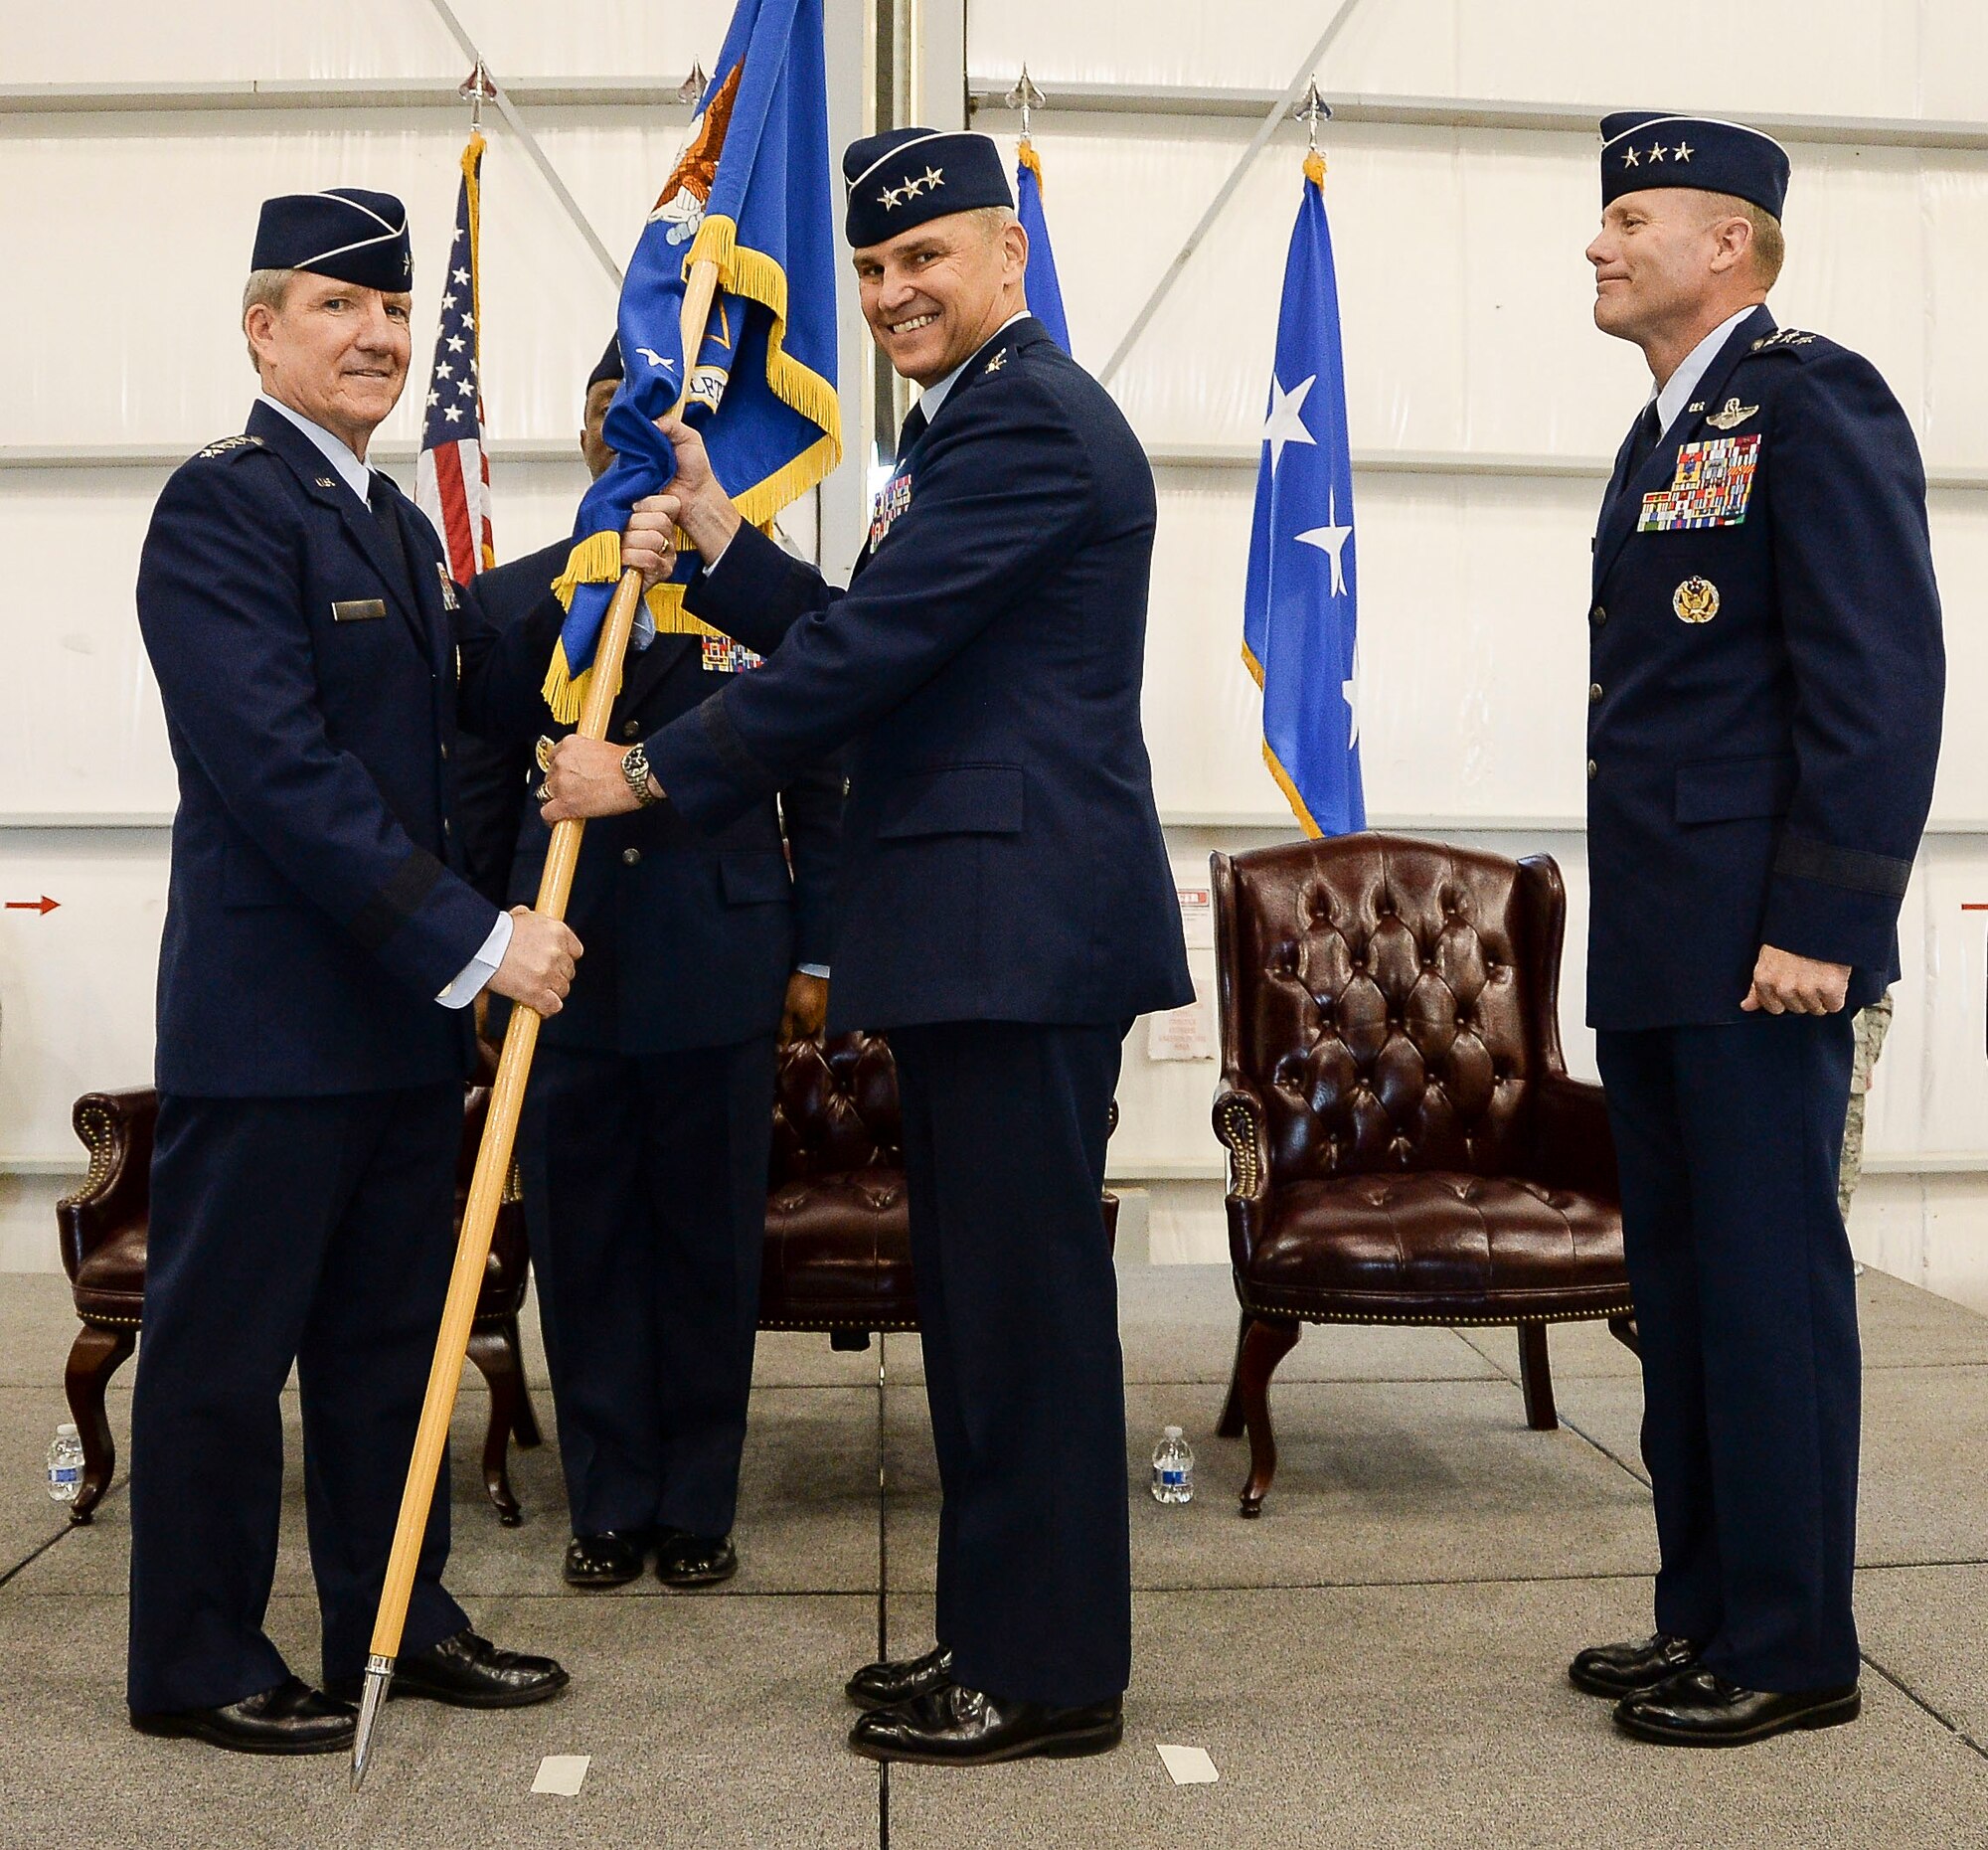 Gen. Hawk Carlise, Air Combat Command Commander, passes the 12th Air Force (Air Forces Southern) guidon to Lt. Gen. Chris Nowland, 12th Air Force (Air Forces Southern) Commander, as he assumes command during a ceremony at Davis-Monthan AFB, Ariz., Dec. 19, 2014. The passing of the guidon marks the beginning of Nowland’s tour as commander of 12th Air Force (Air Forces Southern). (U.S. Air Force photo by Staff Sgt. Adam Grant/Released)